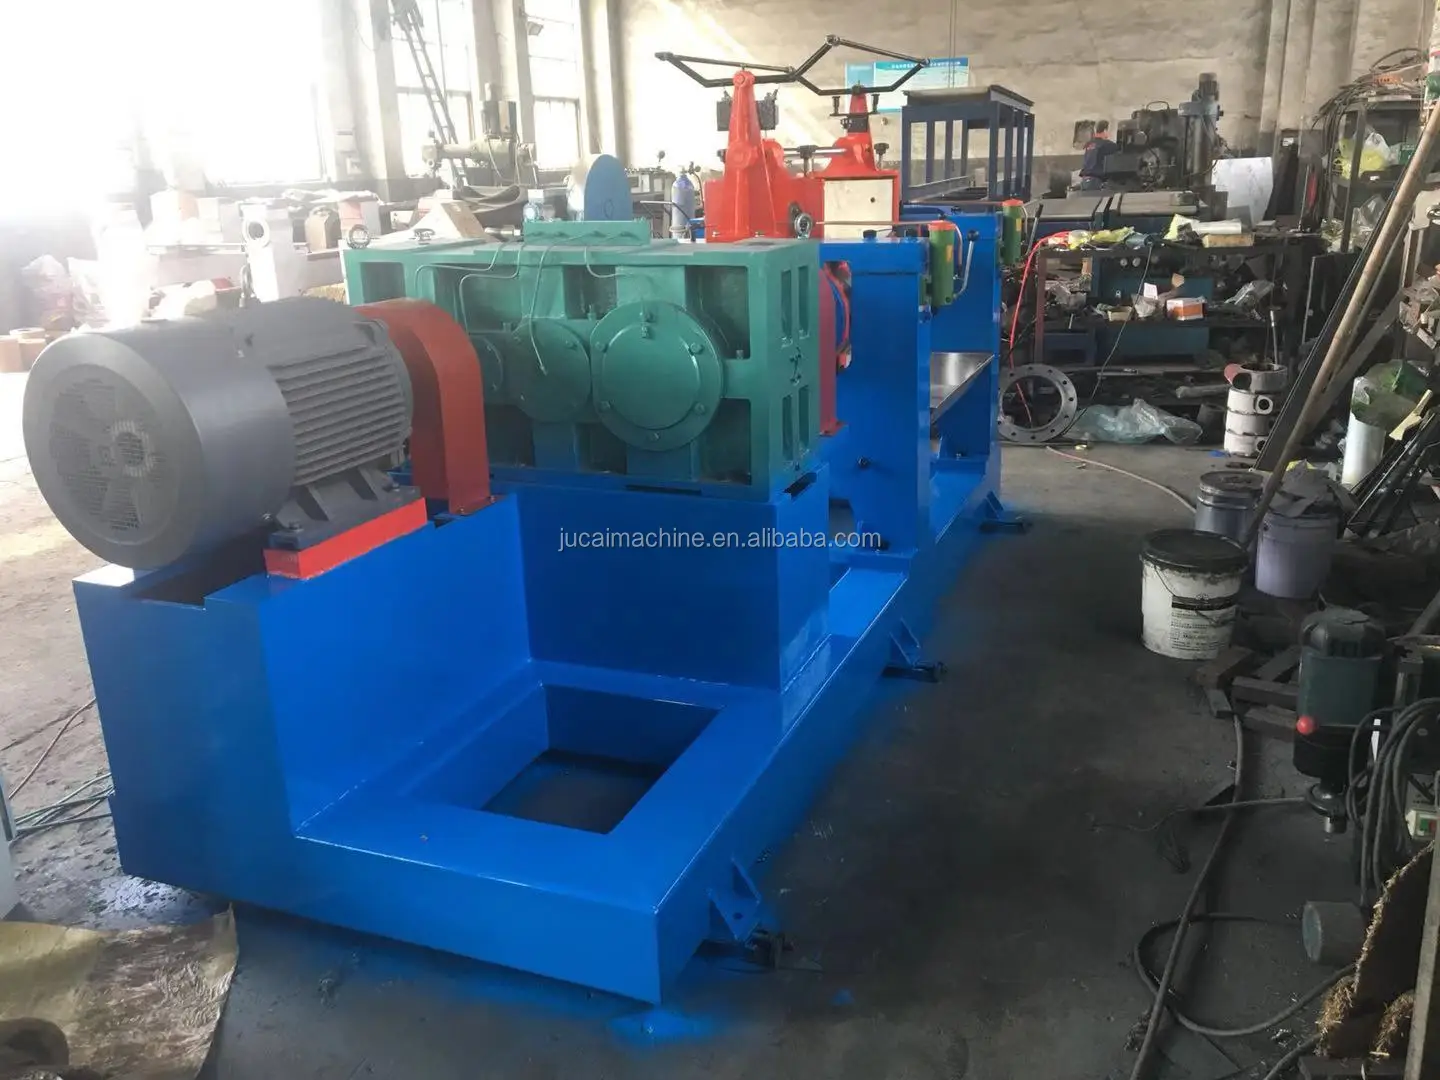 Test Rubber Two Roll Open Mill - Buy Test Mill,Lab Two 